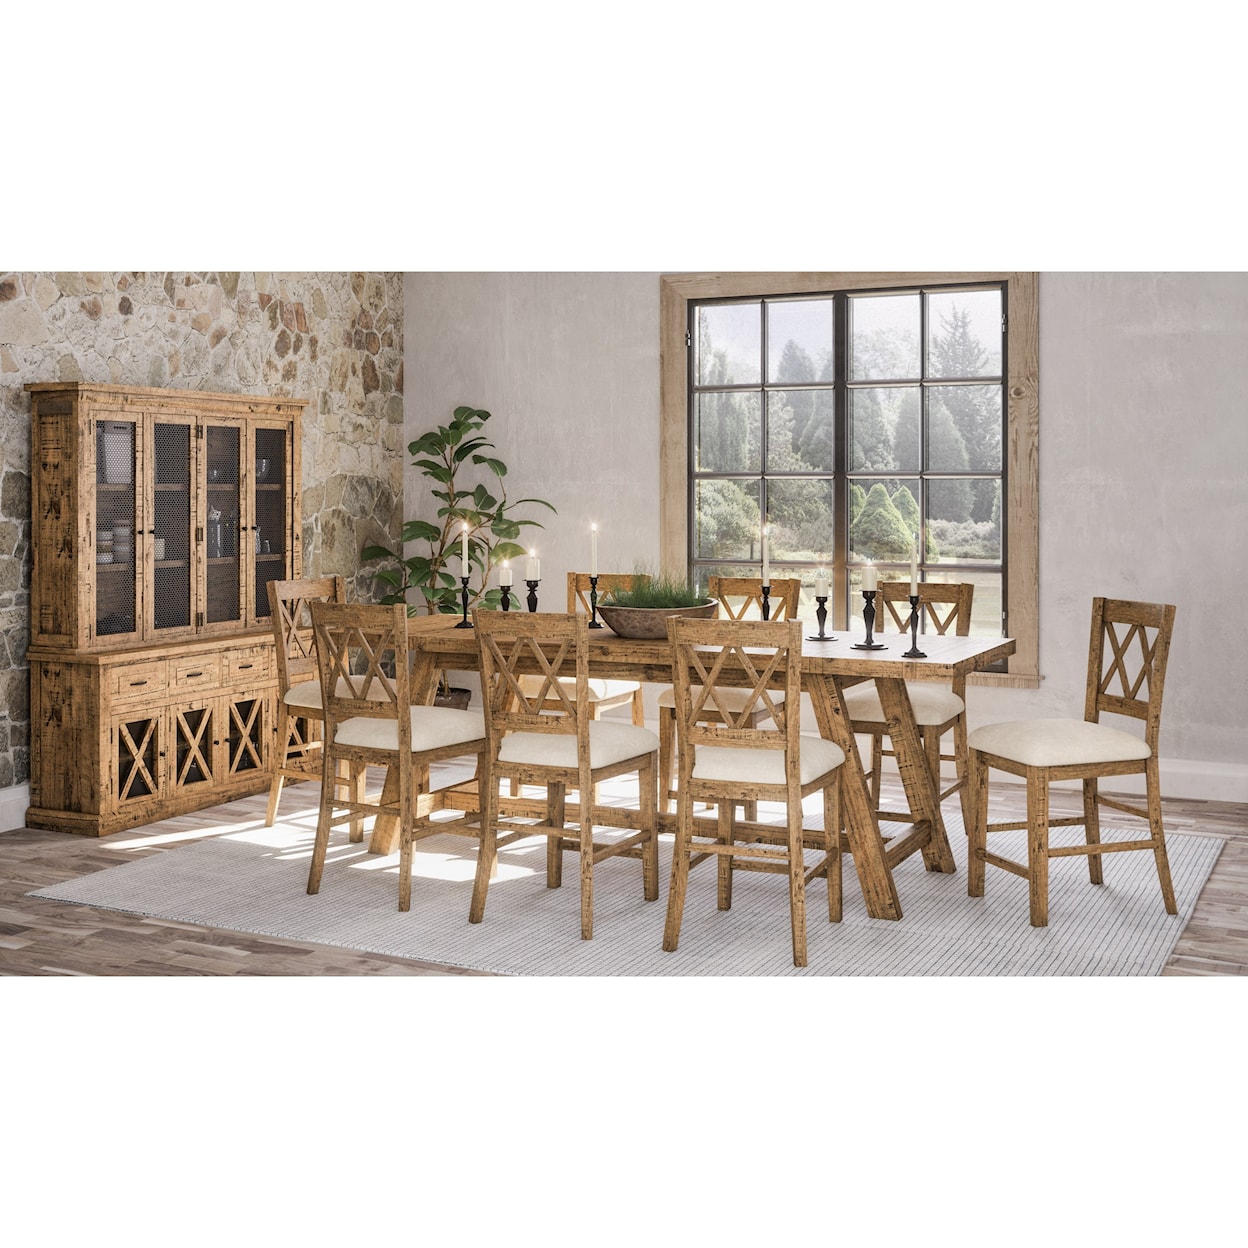 VFM Signature Telluride 9-Piece Counter Height Table and Chair Set